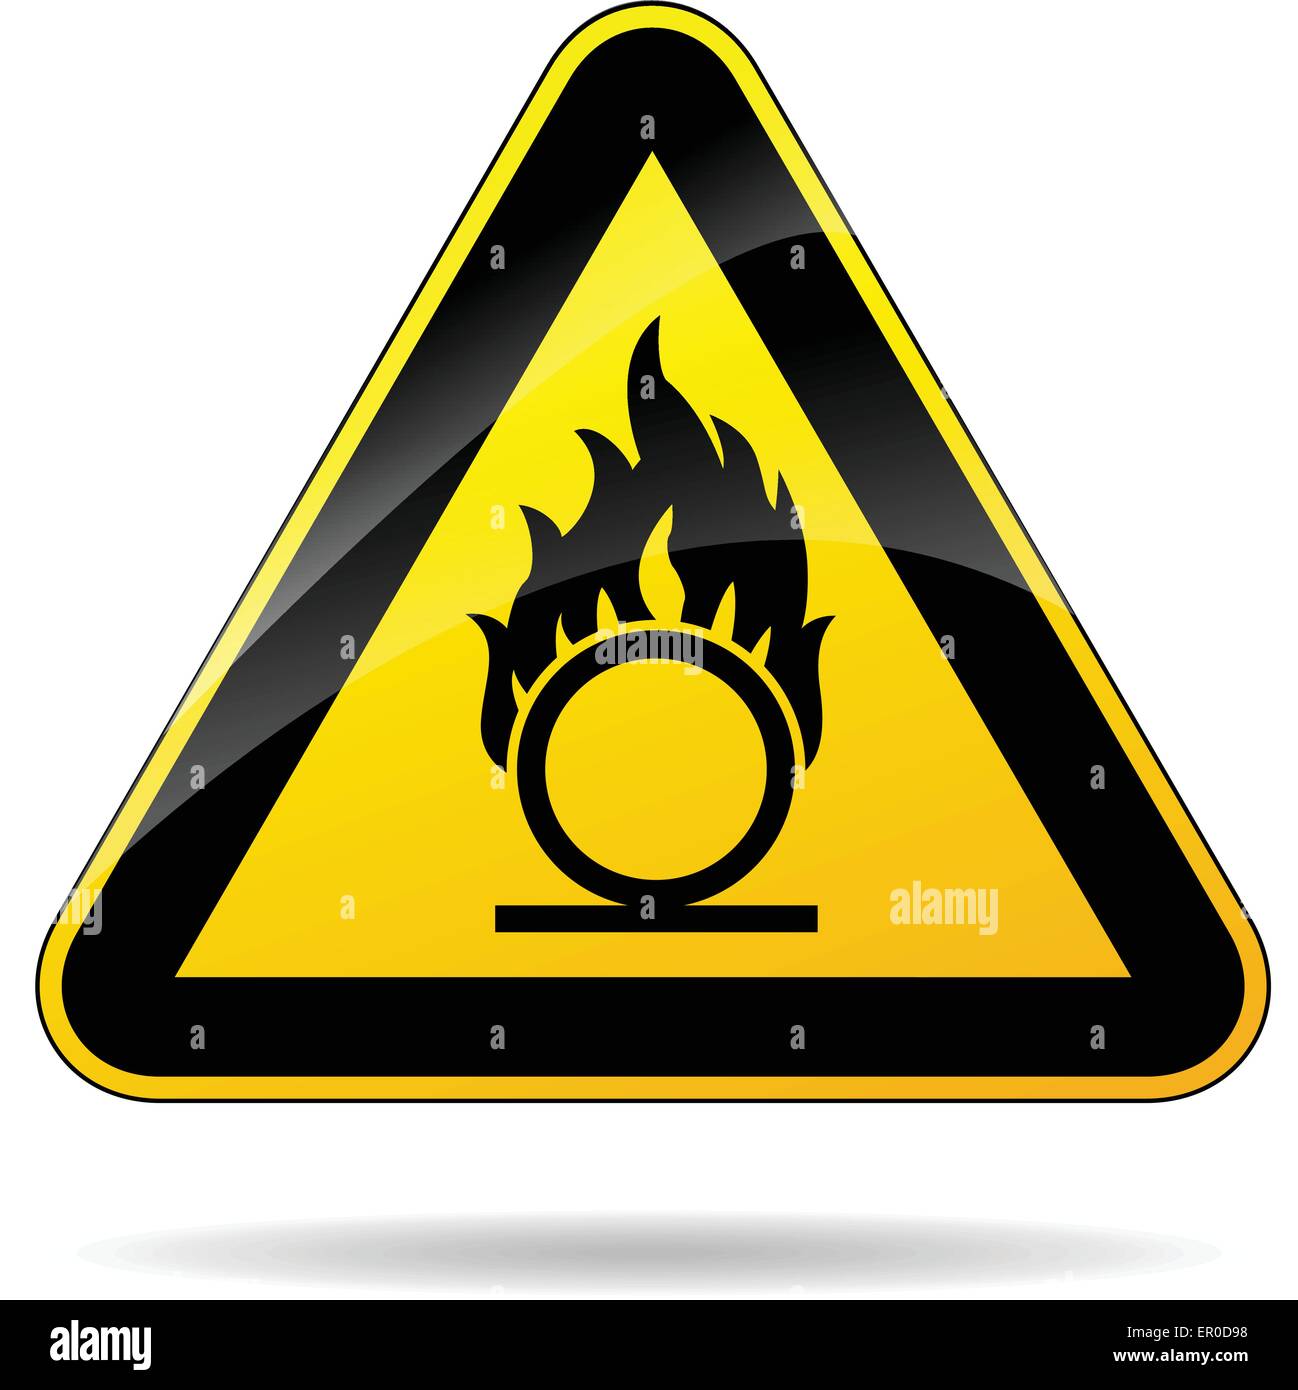 illustration of safety triangle sign on white background Stock Vector